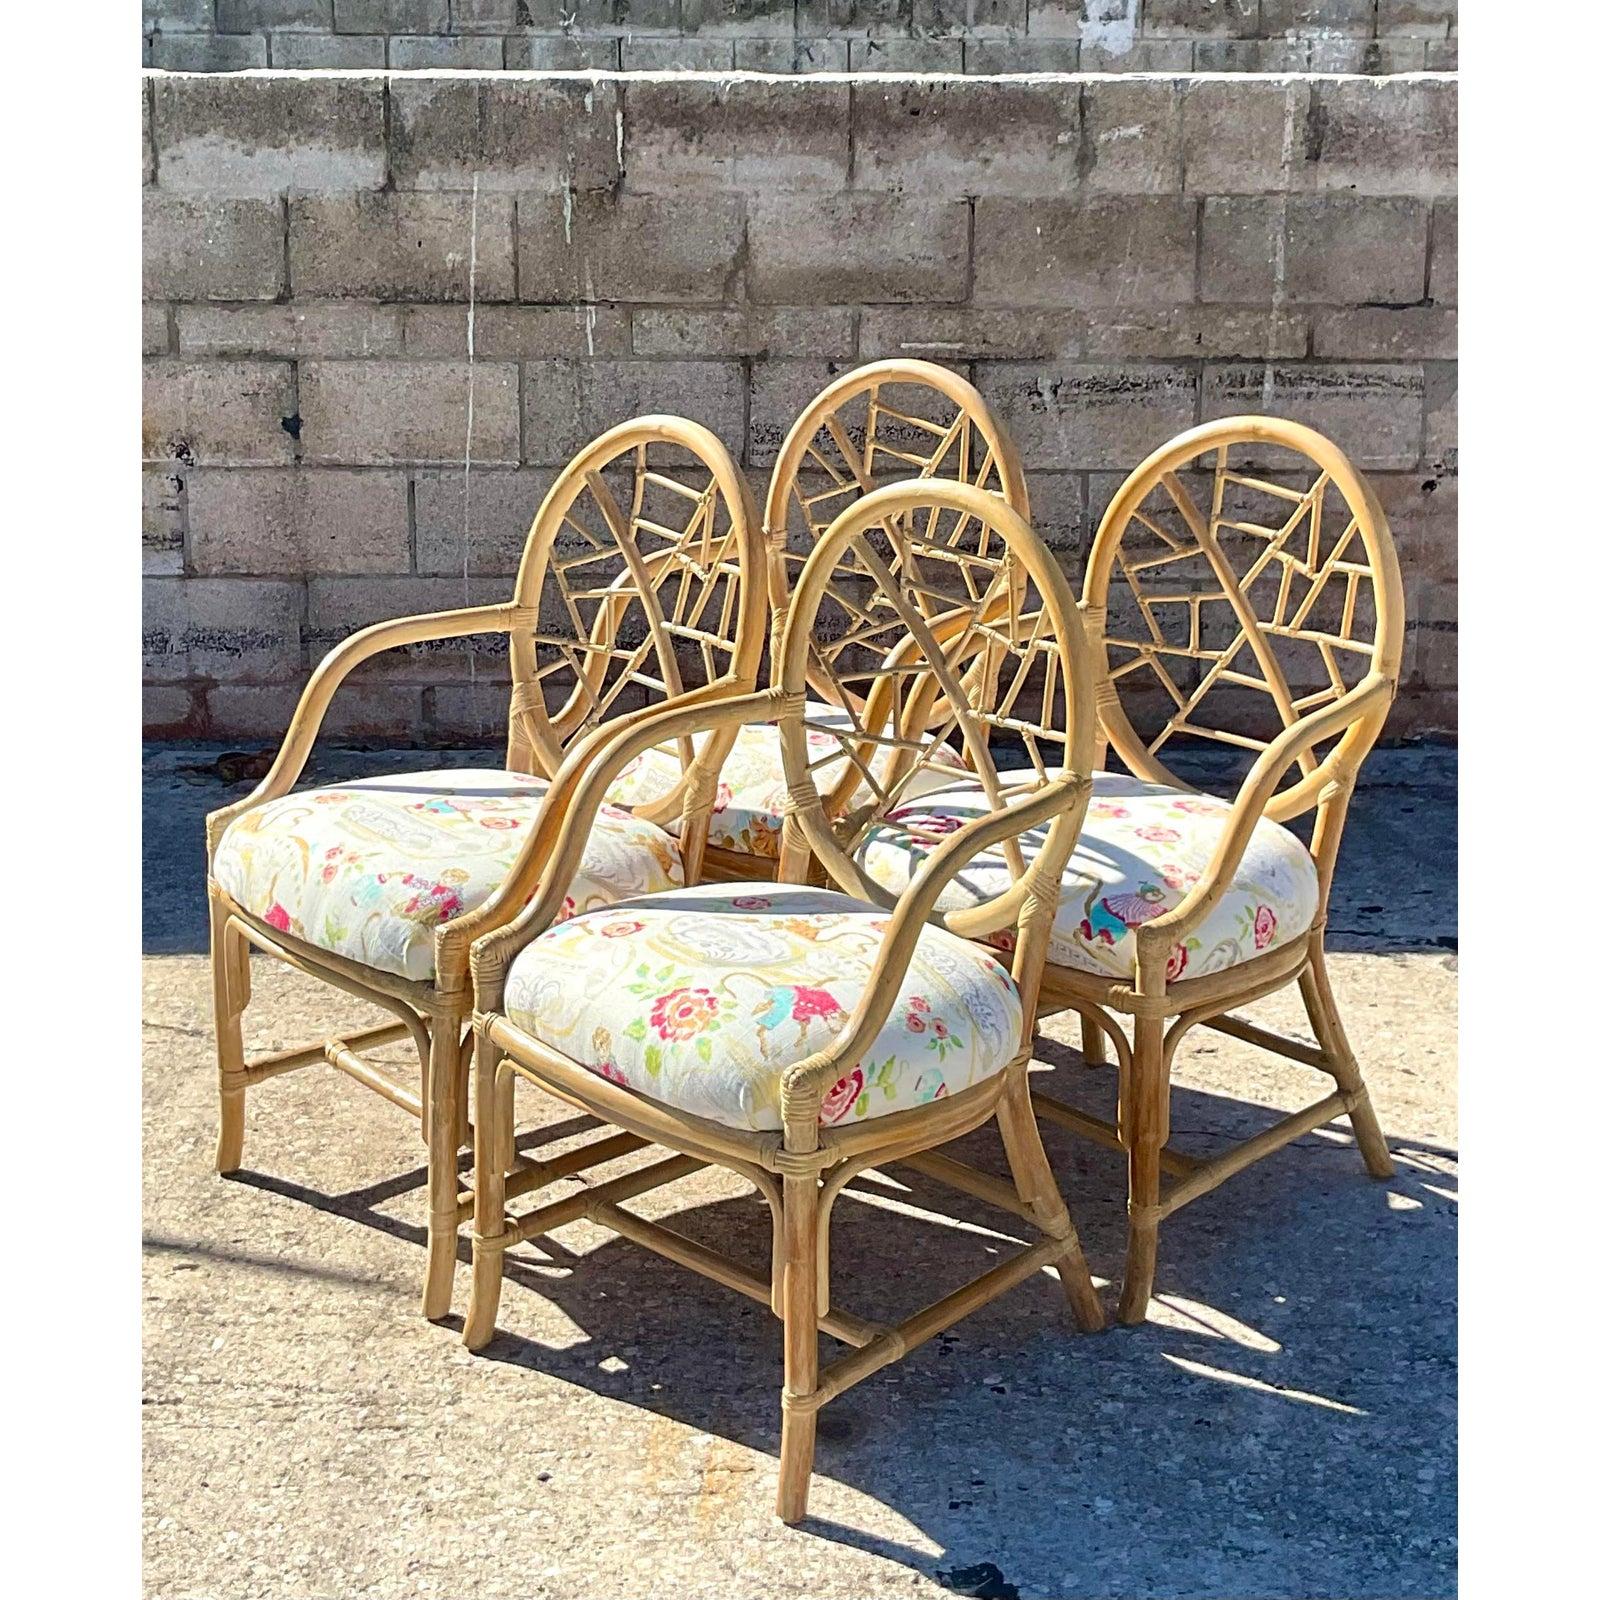 Upholstery Vintage Coastal Rattan “Cracked Ice” Dining Chairs After McGuire